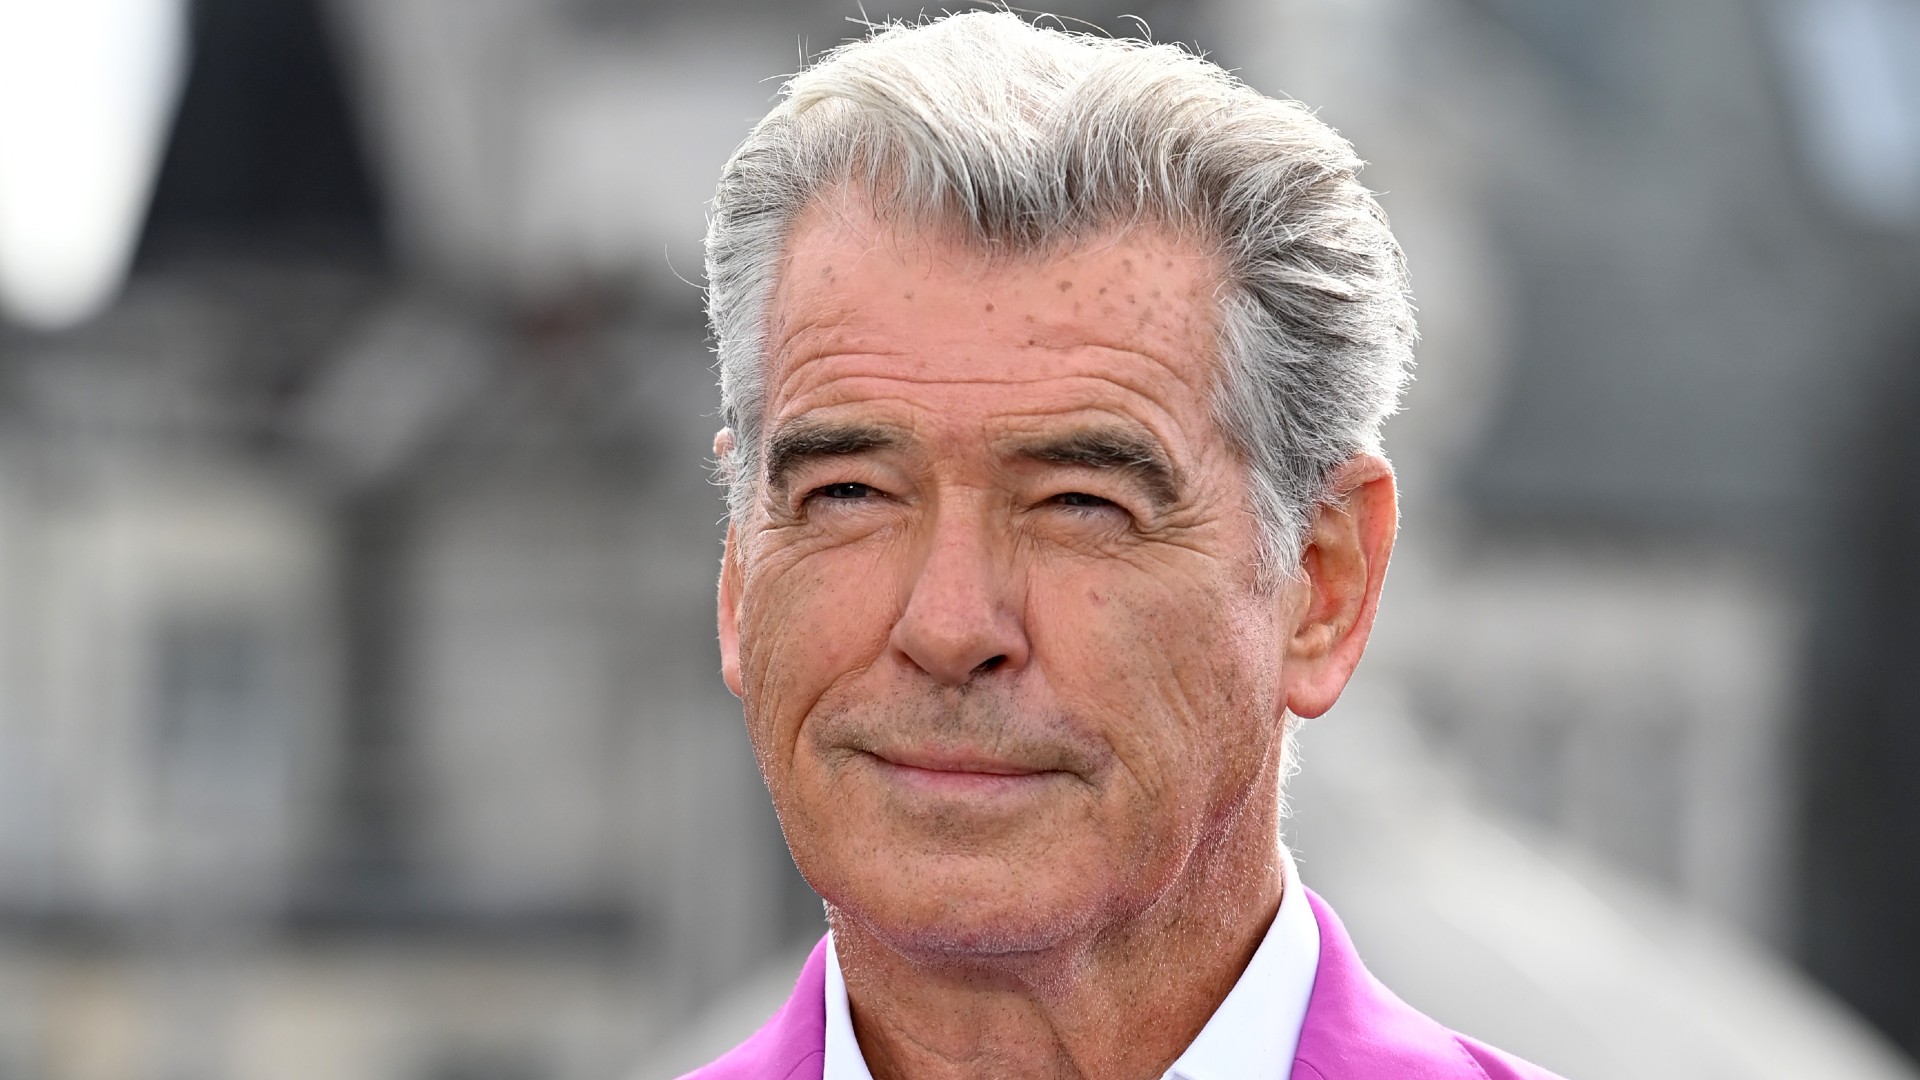 10 Reasons We're Always Glad to Hear from Pierce Brosnan